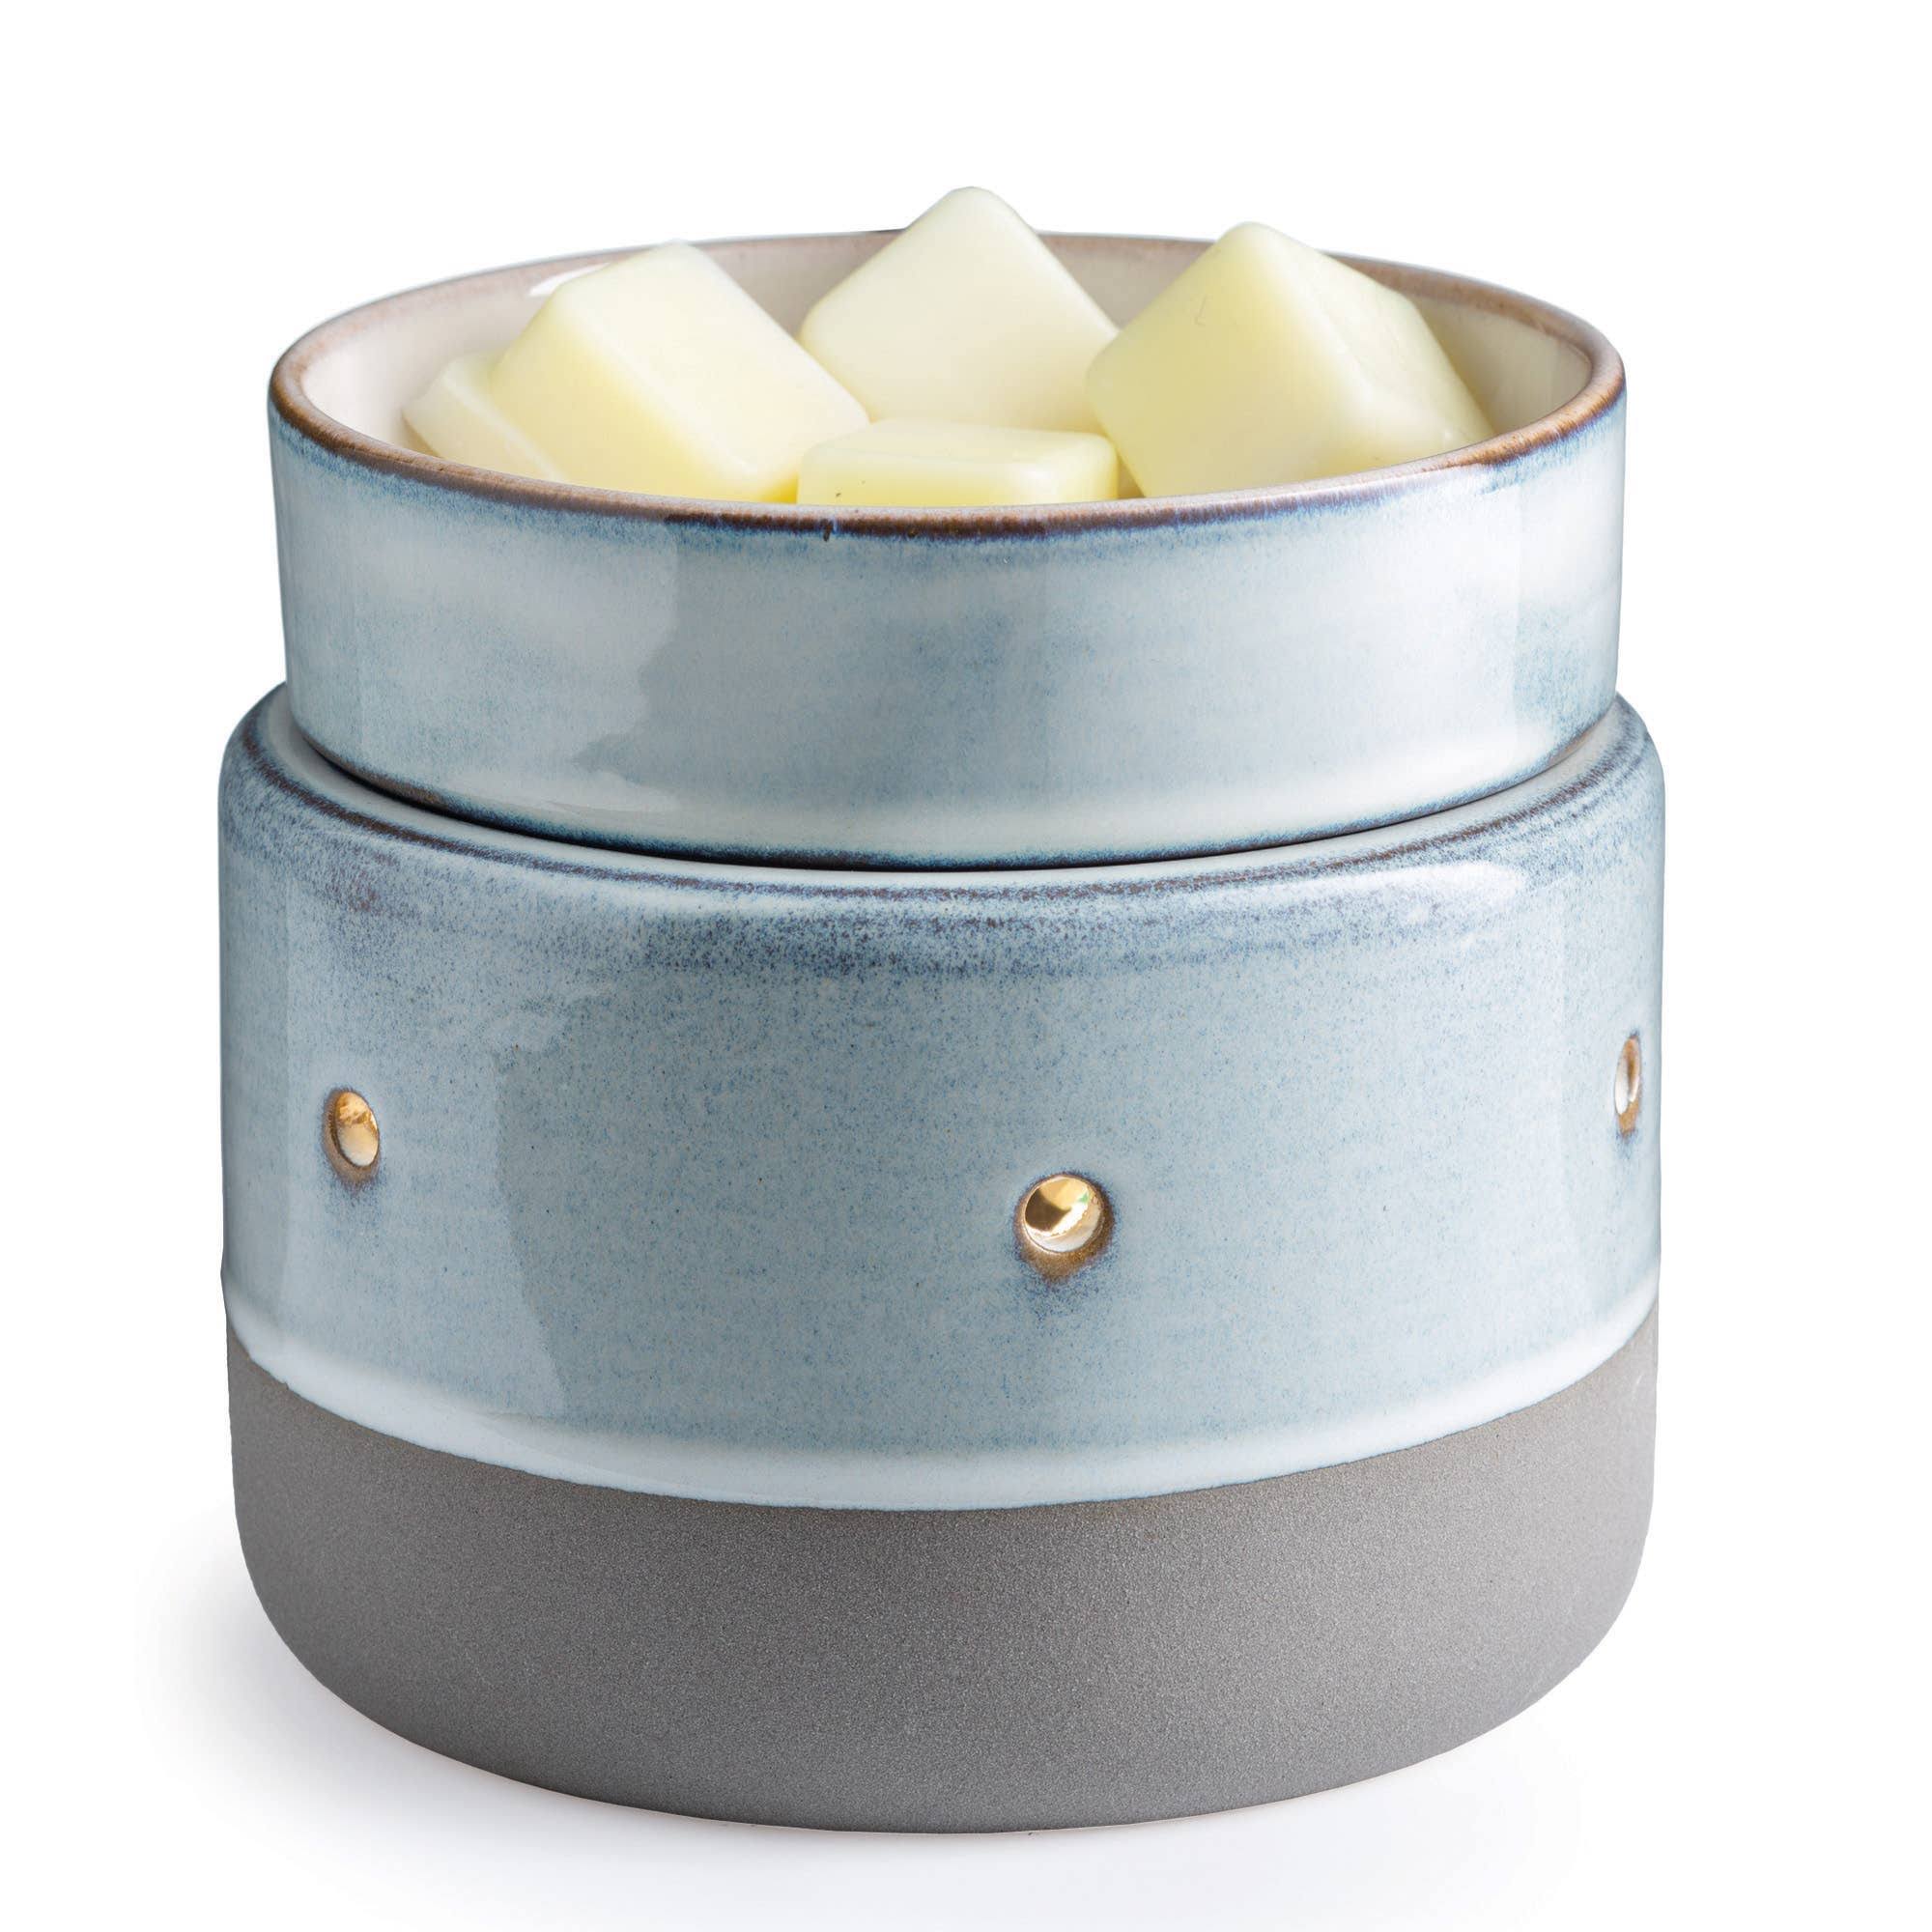 Glazed Concrete 2-in-1 Deluxe Fragrance Warmer - Candle Warmers